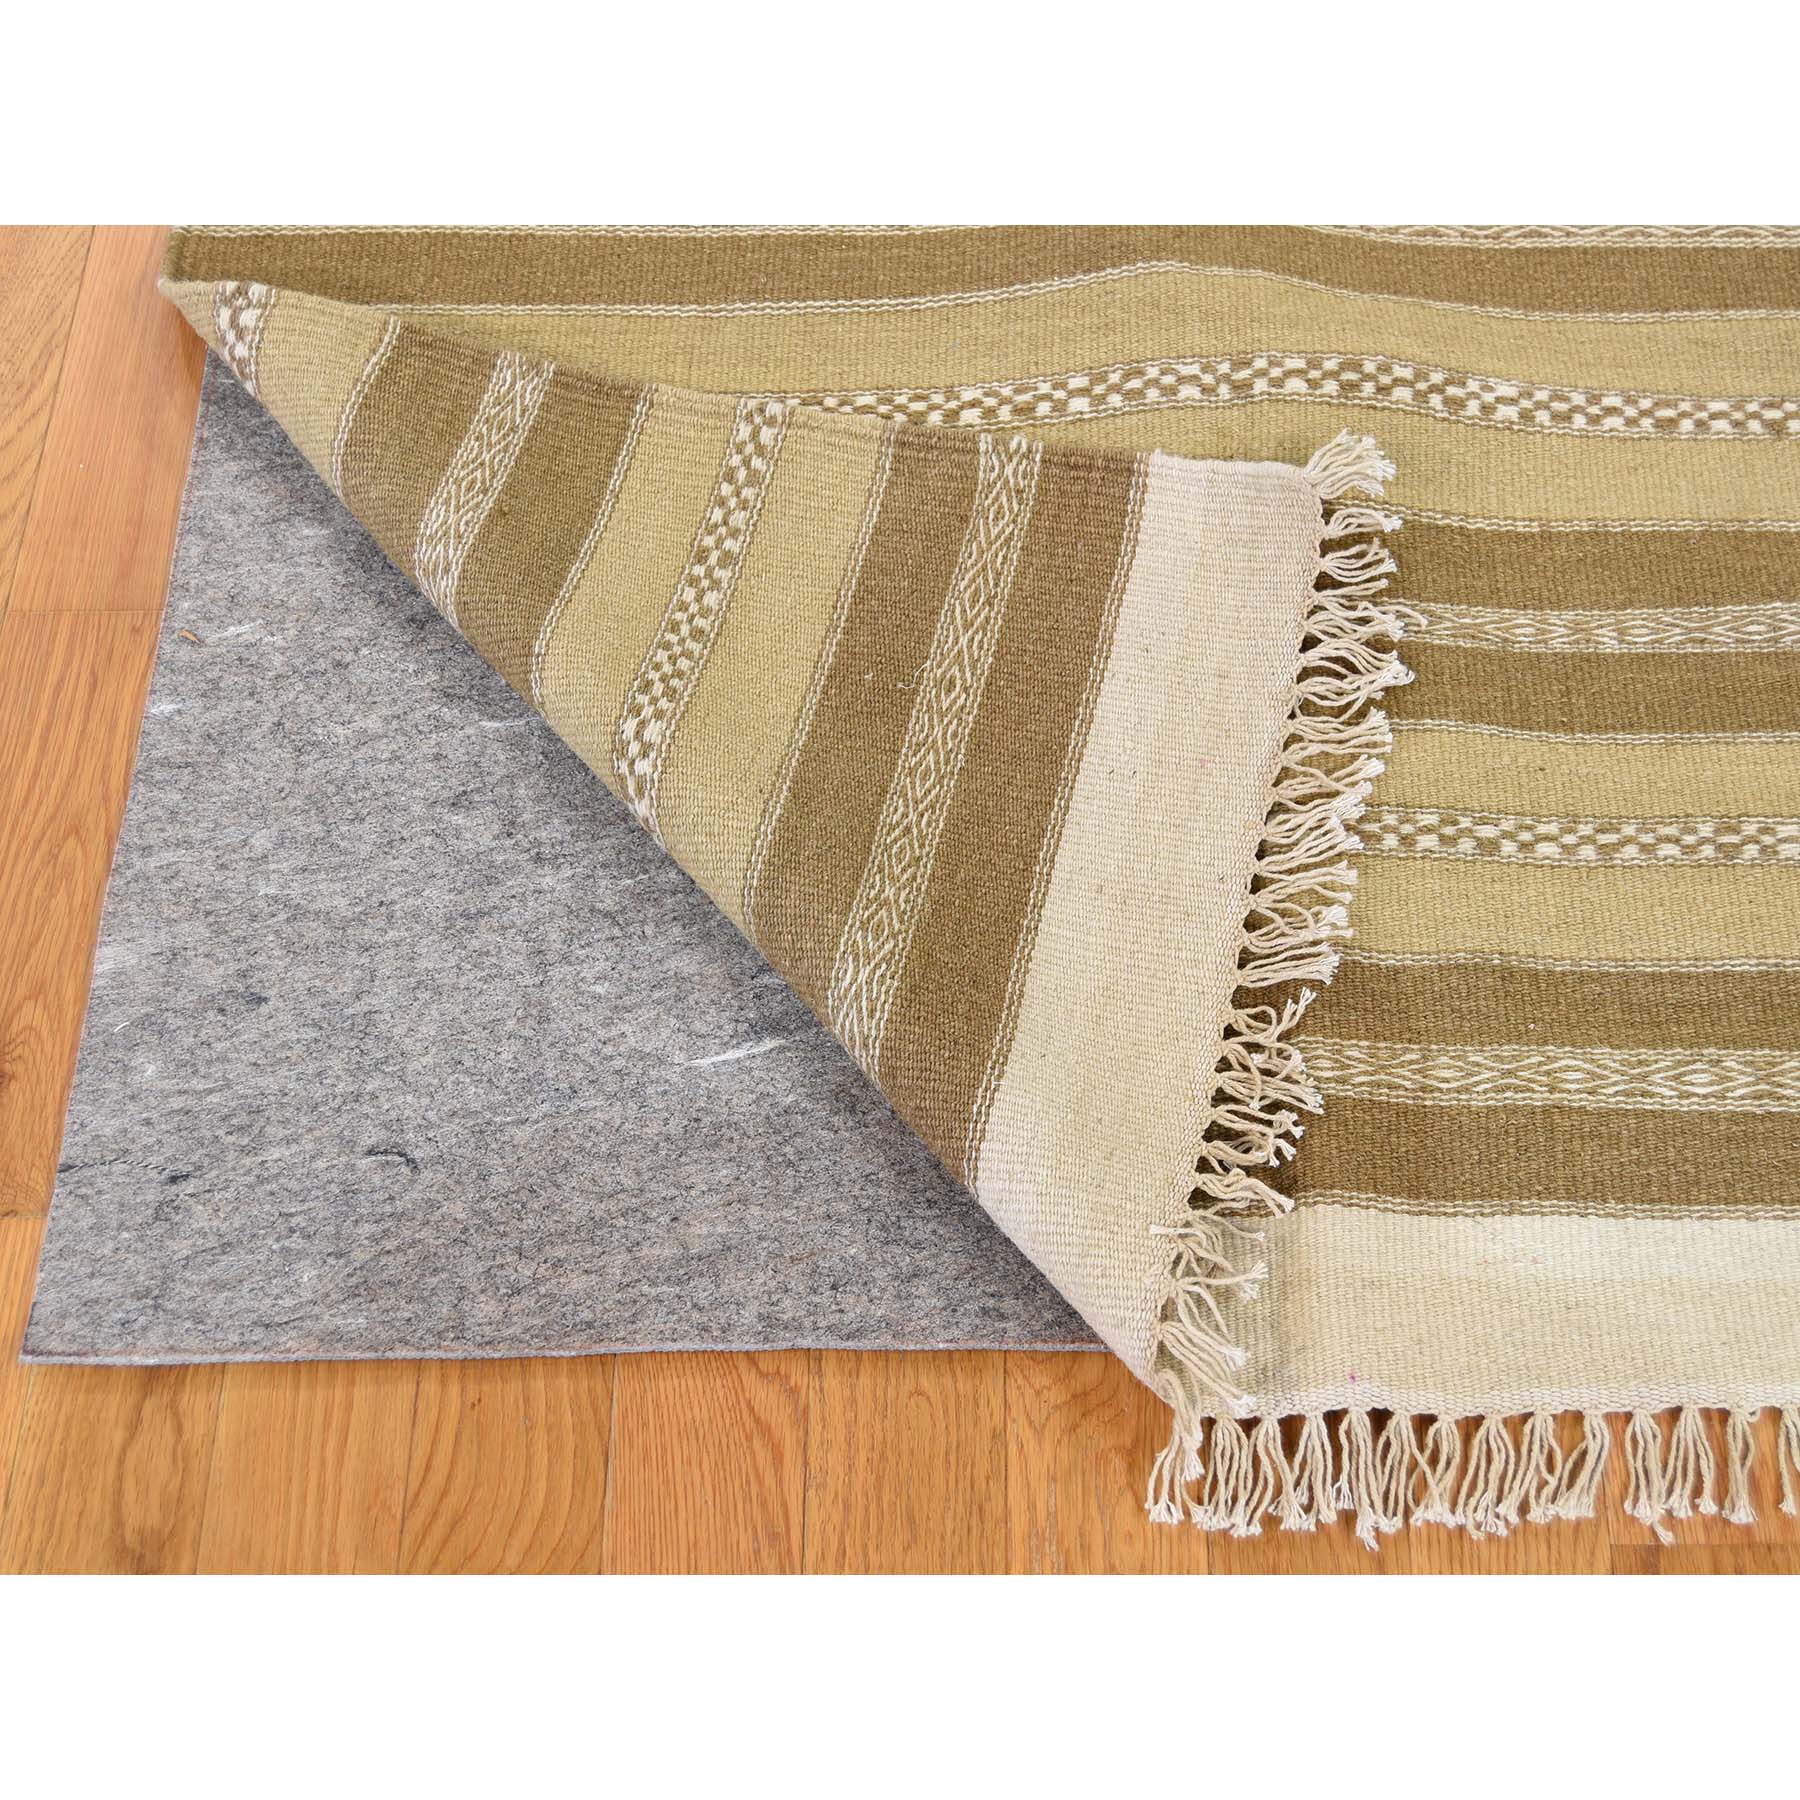 3-9--x6- Reversible Hand Woven Striped Durie Kilim Flat Weave Rug 